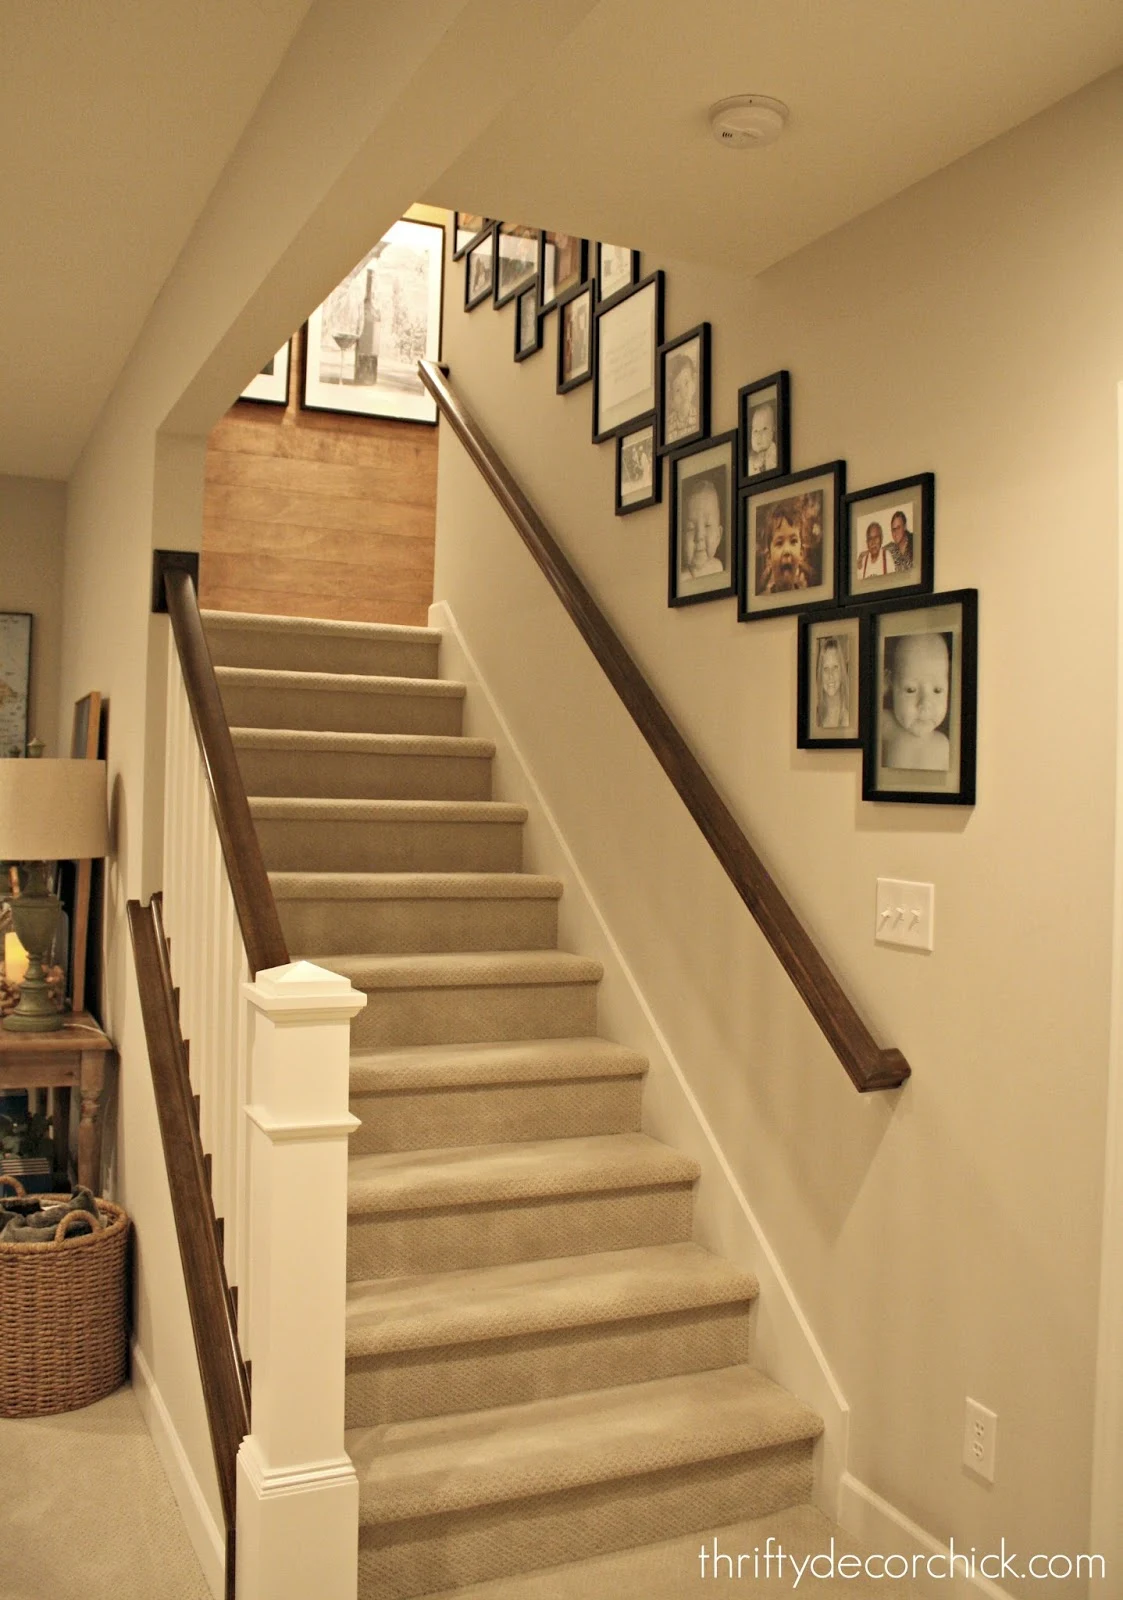 Gallery wall on stairs with wood accent wall